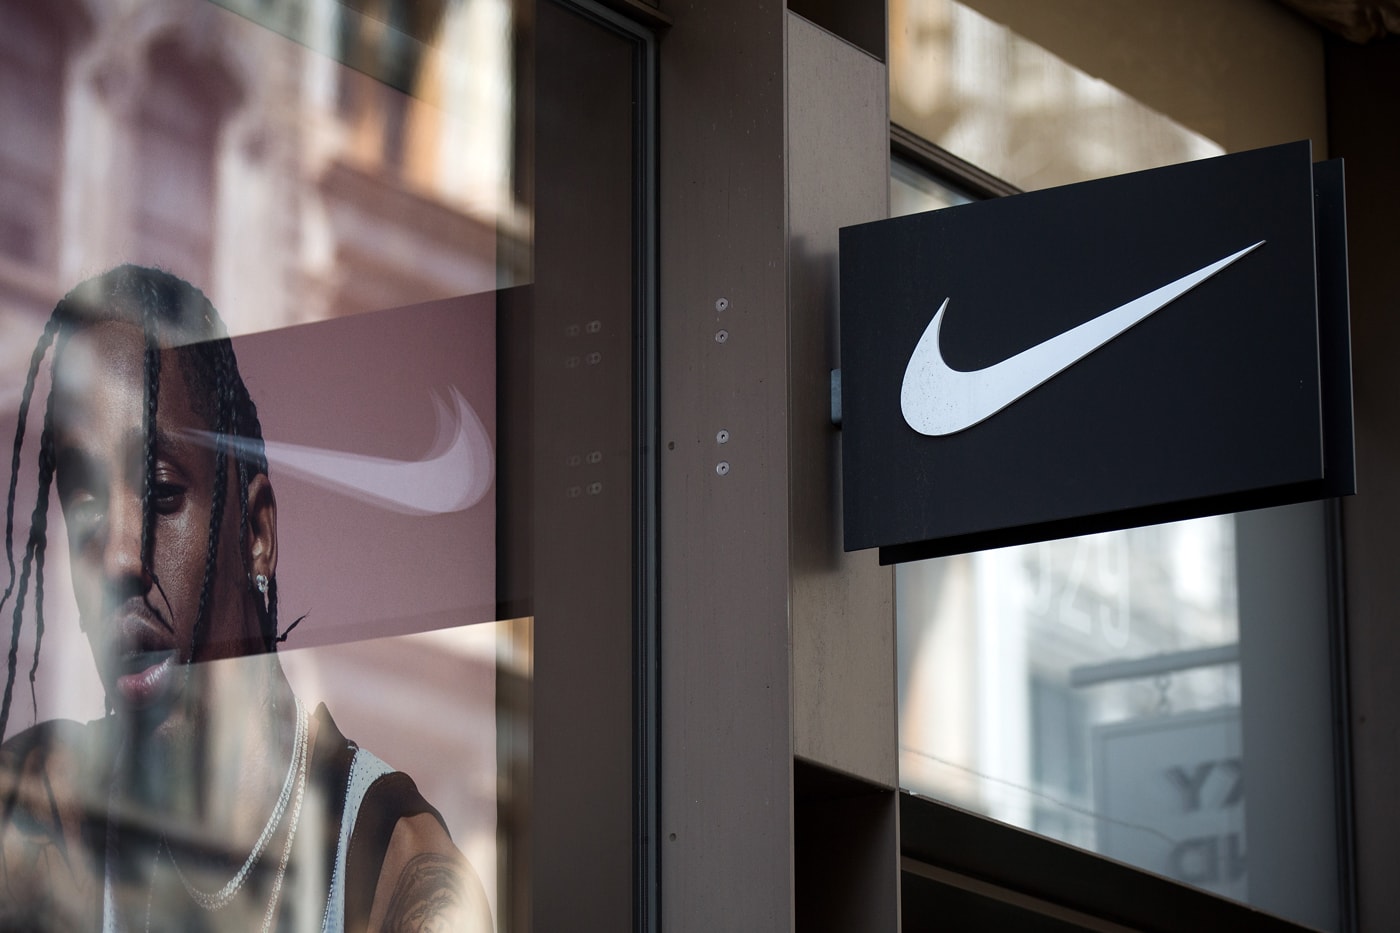 Nike Outranks Competition in Consumer Perception adidas under armour lululemon forbes fashion footwear company giants study SPORTS APPAREL CONSUMER SURVEY MARCH 2019 & UNITY MARKETING Canaccord Genuity Sports Apparel Brands on Innovation, Fashion and Purchase Intent